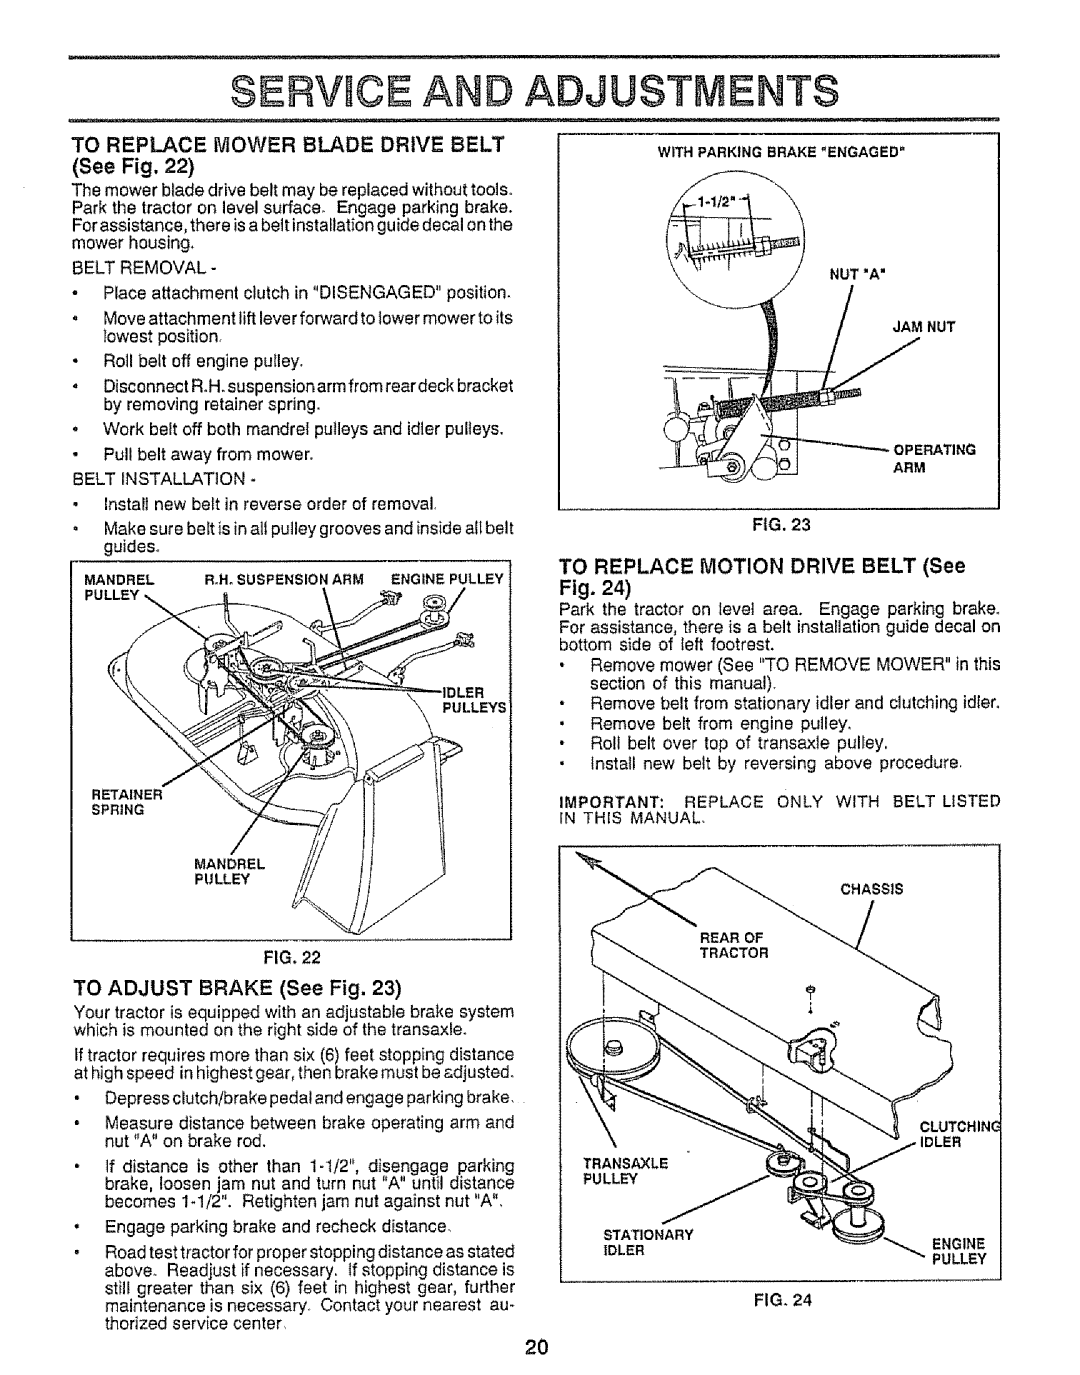 Craftsman 917.255561 Servhce And Adjustments, TO REPLACE MOTION DRIVE BELT See, To Replace Mower Blade Drive Belt, See Fig 